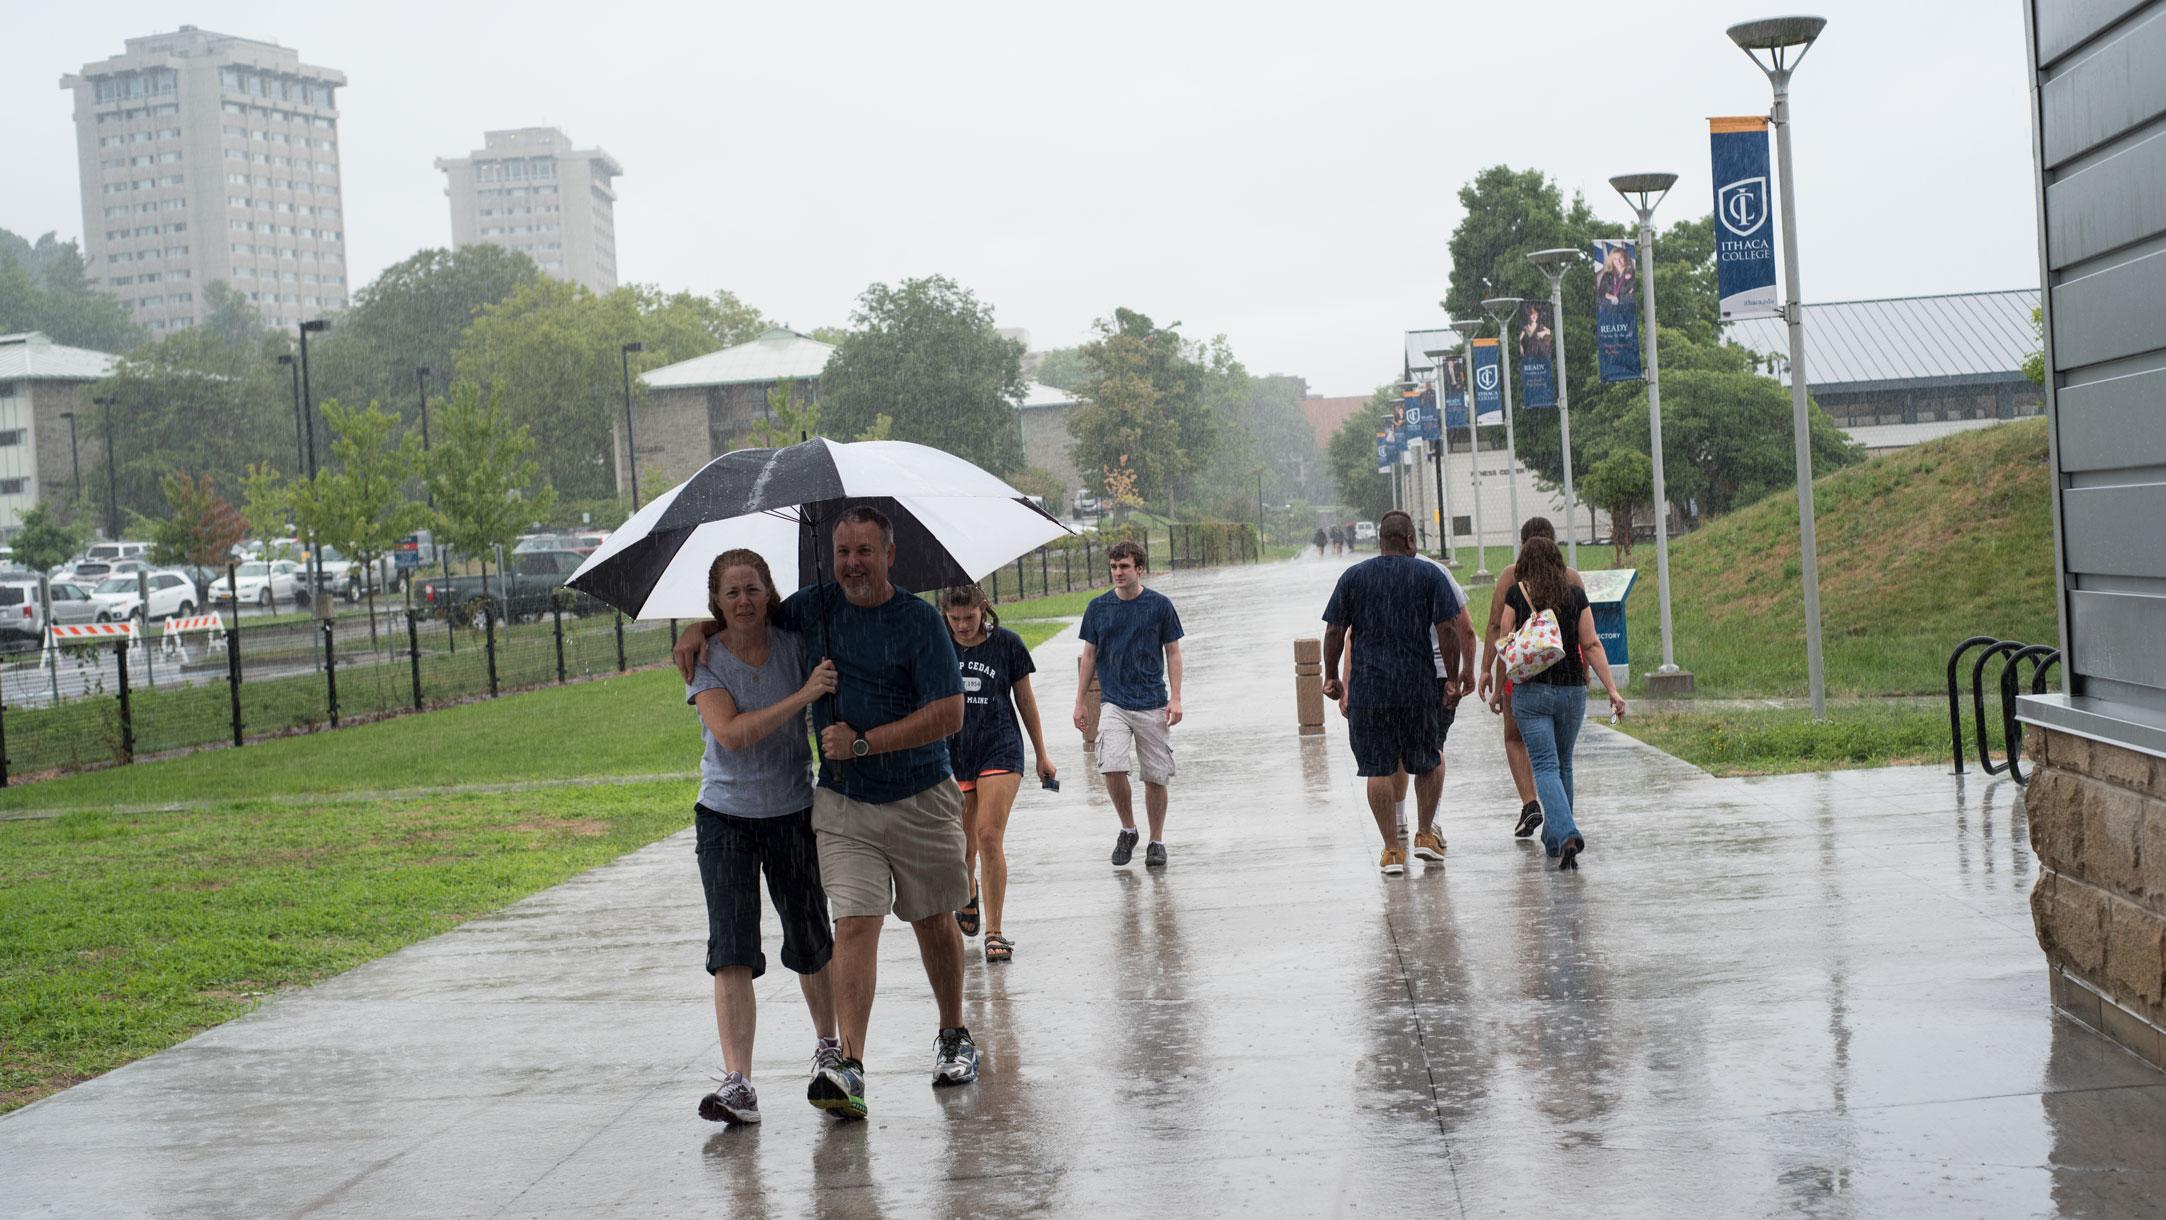 Snapshots of Ithaca College move-in day